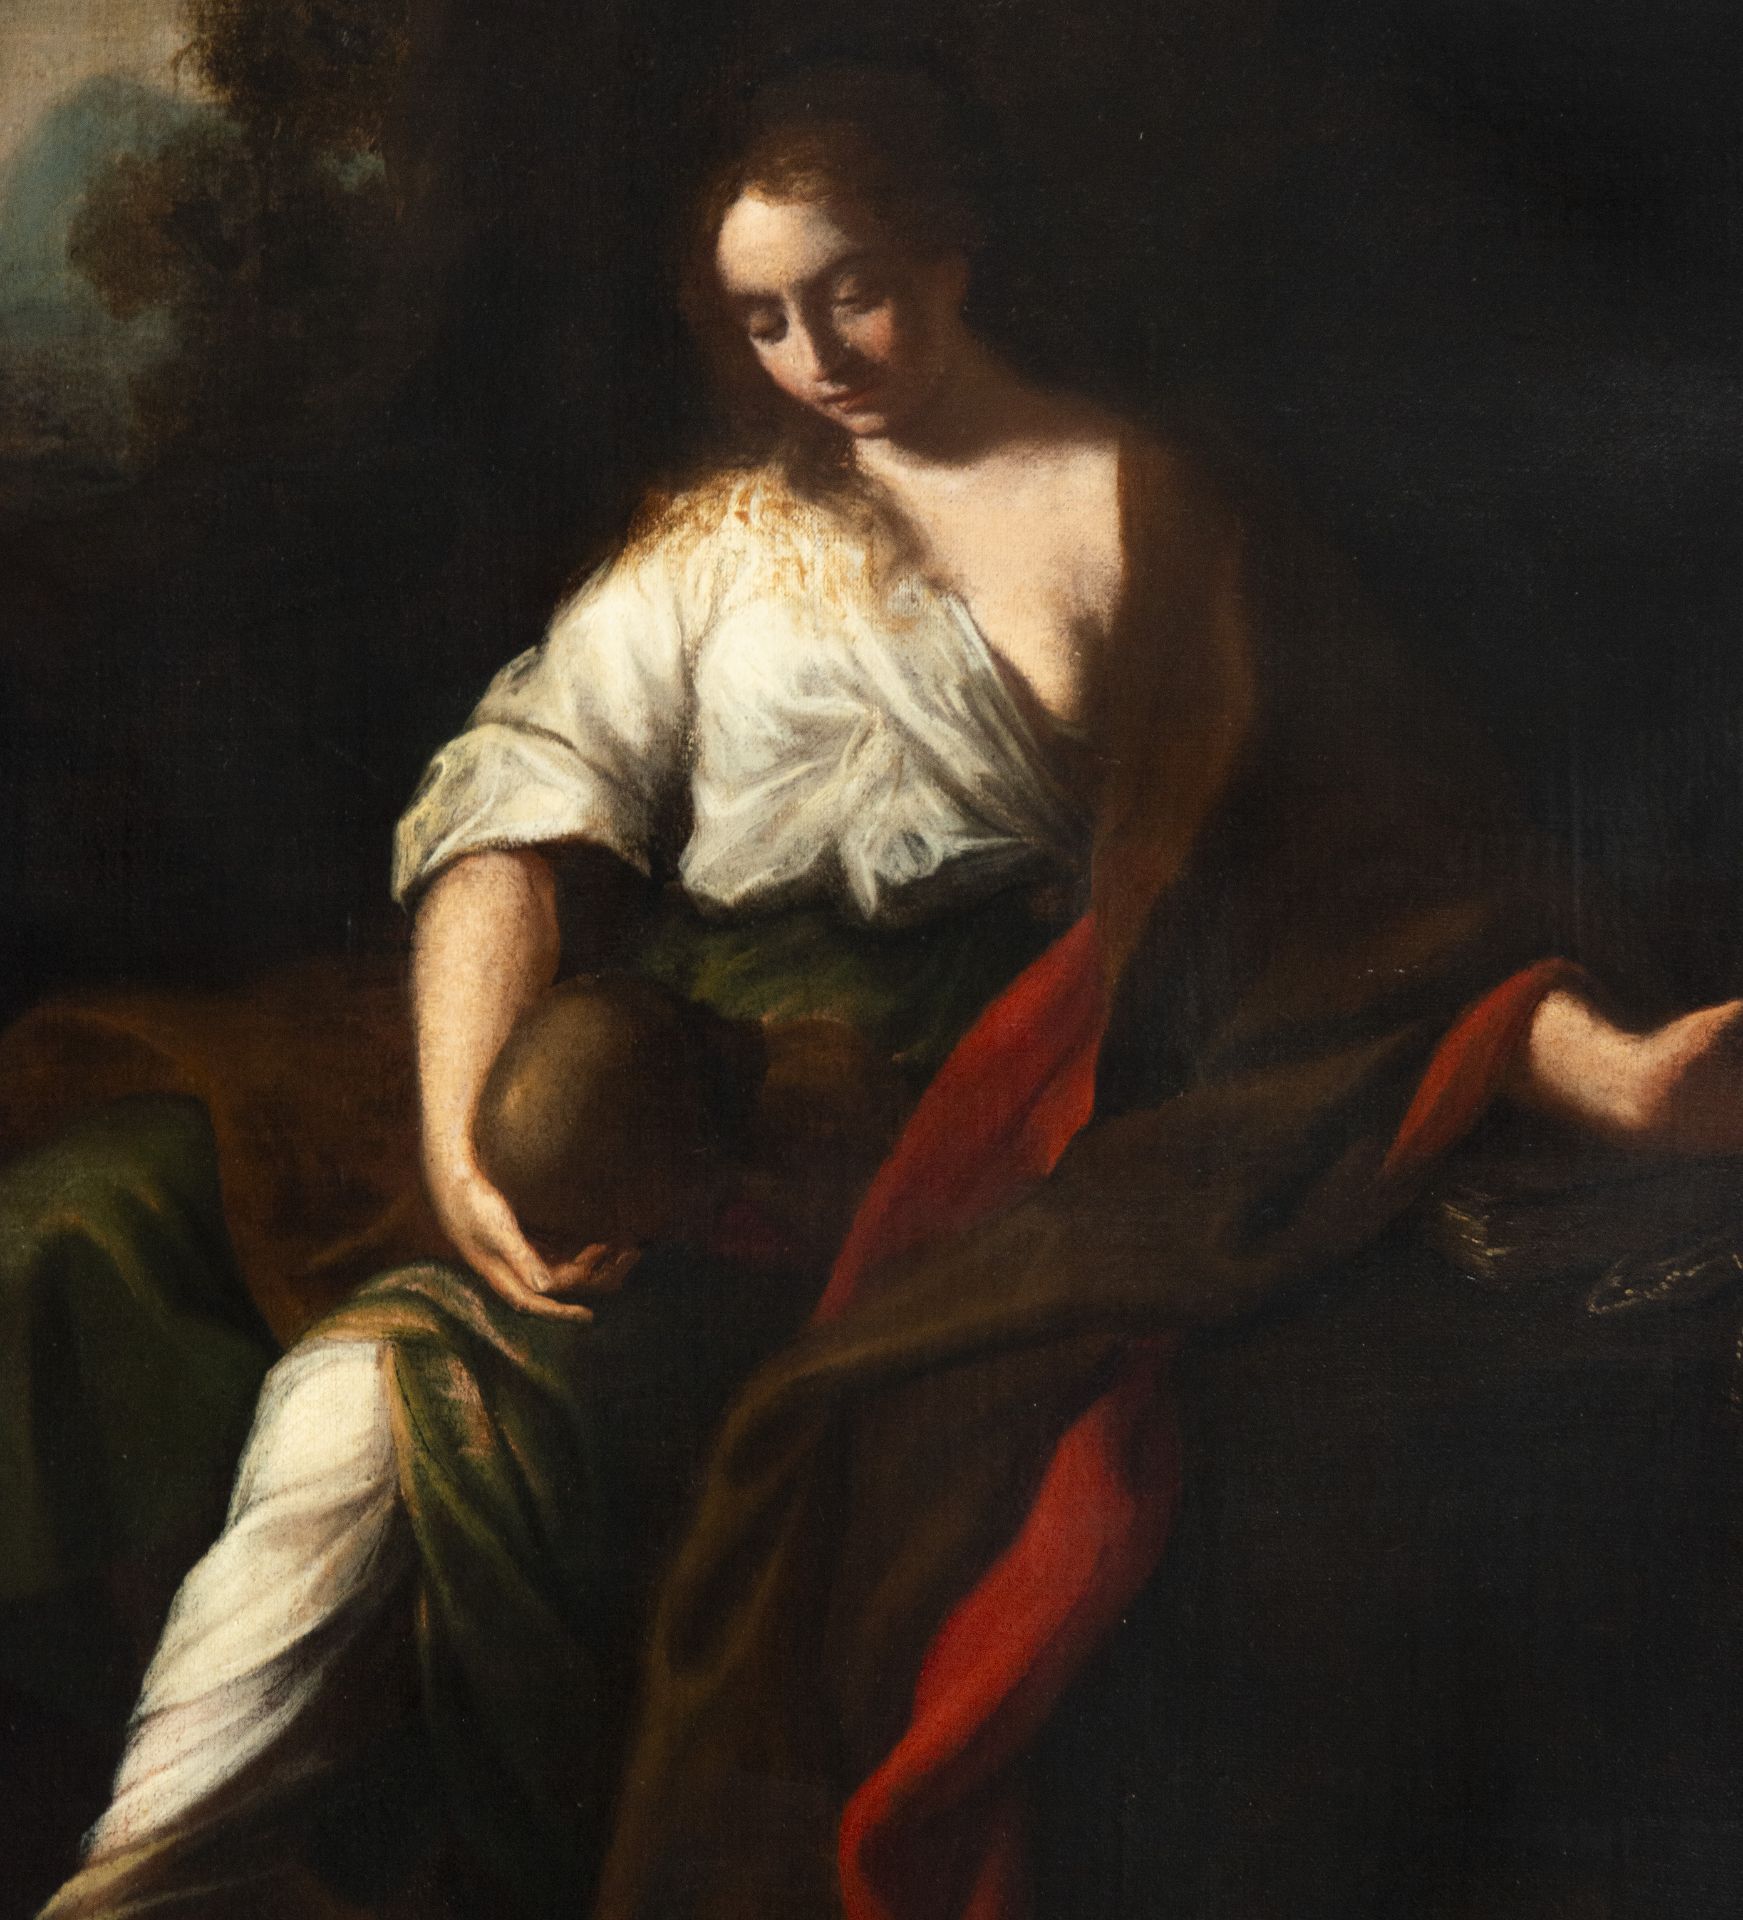 Mary Magdalene of the 18th century - Image 2 of 4